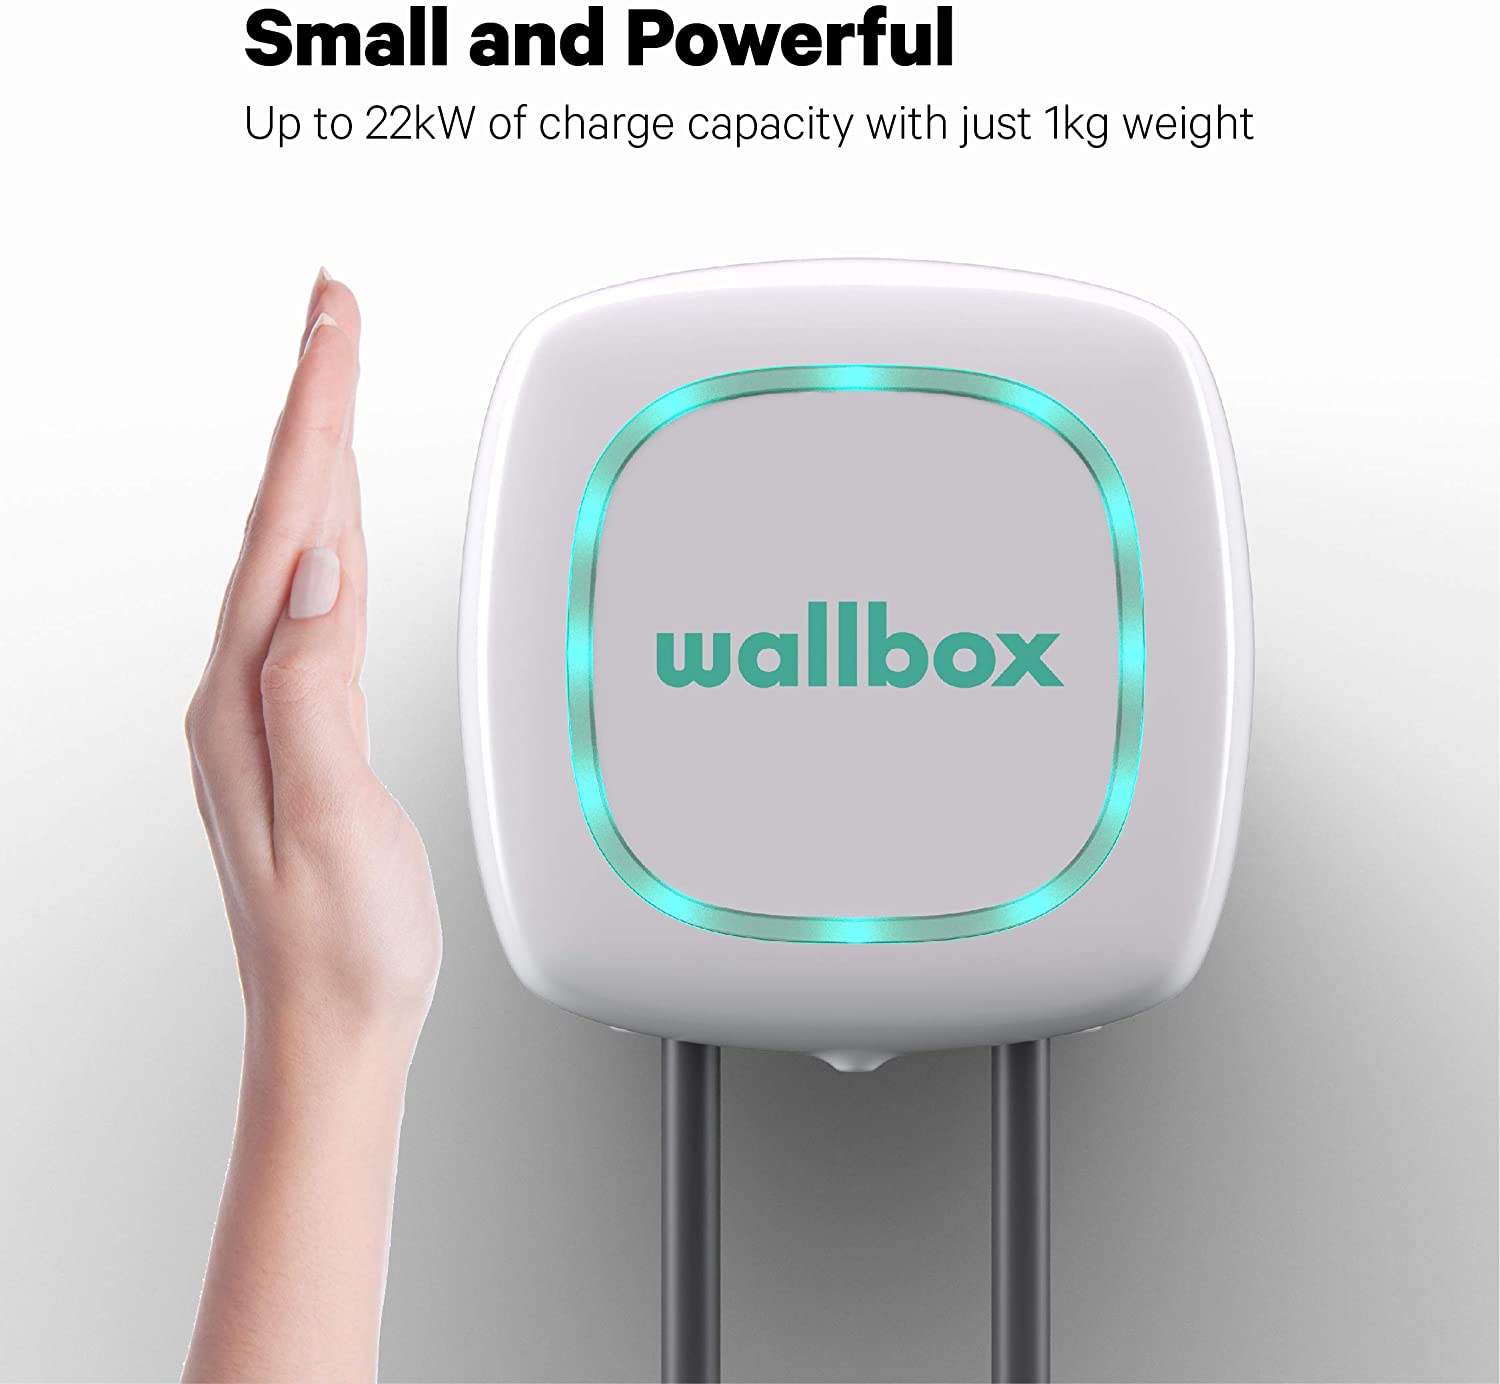 Wallbox Pulsar Plus home EV charger hands-on review - EV Pulse